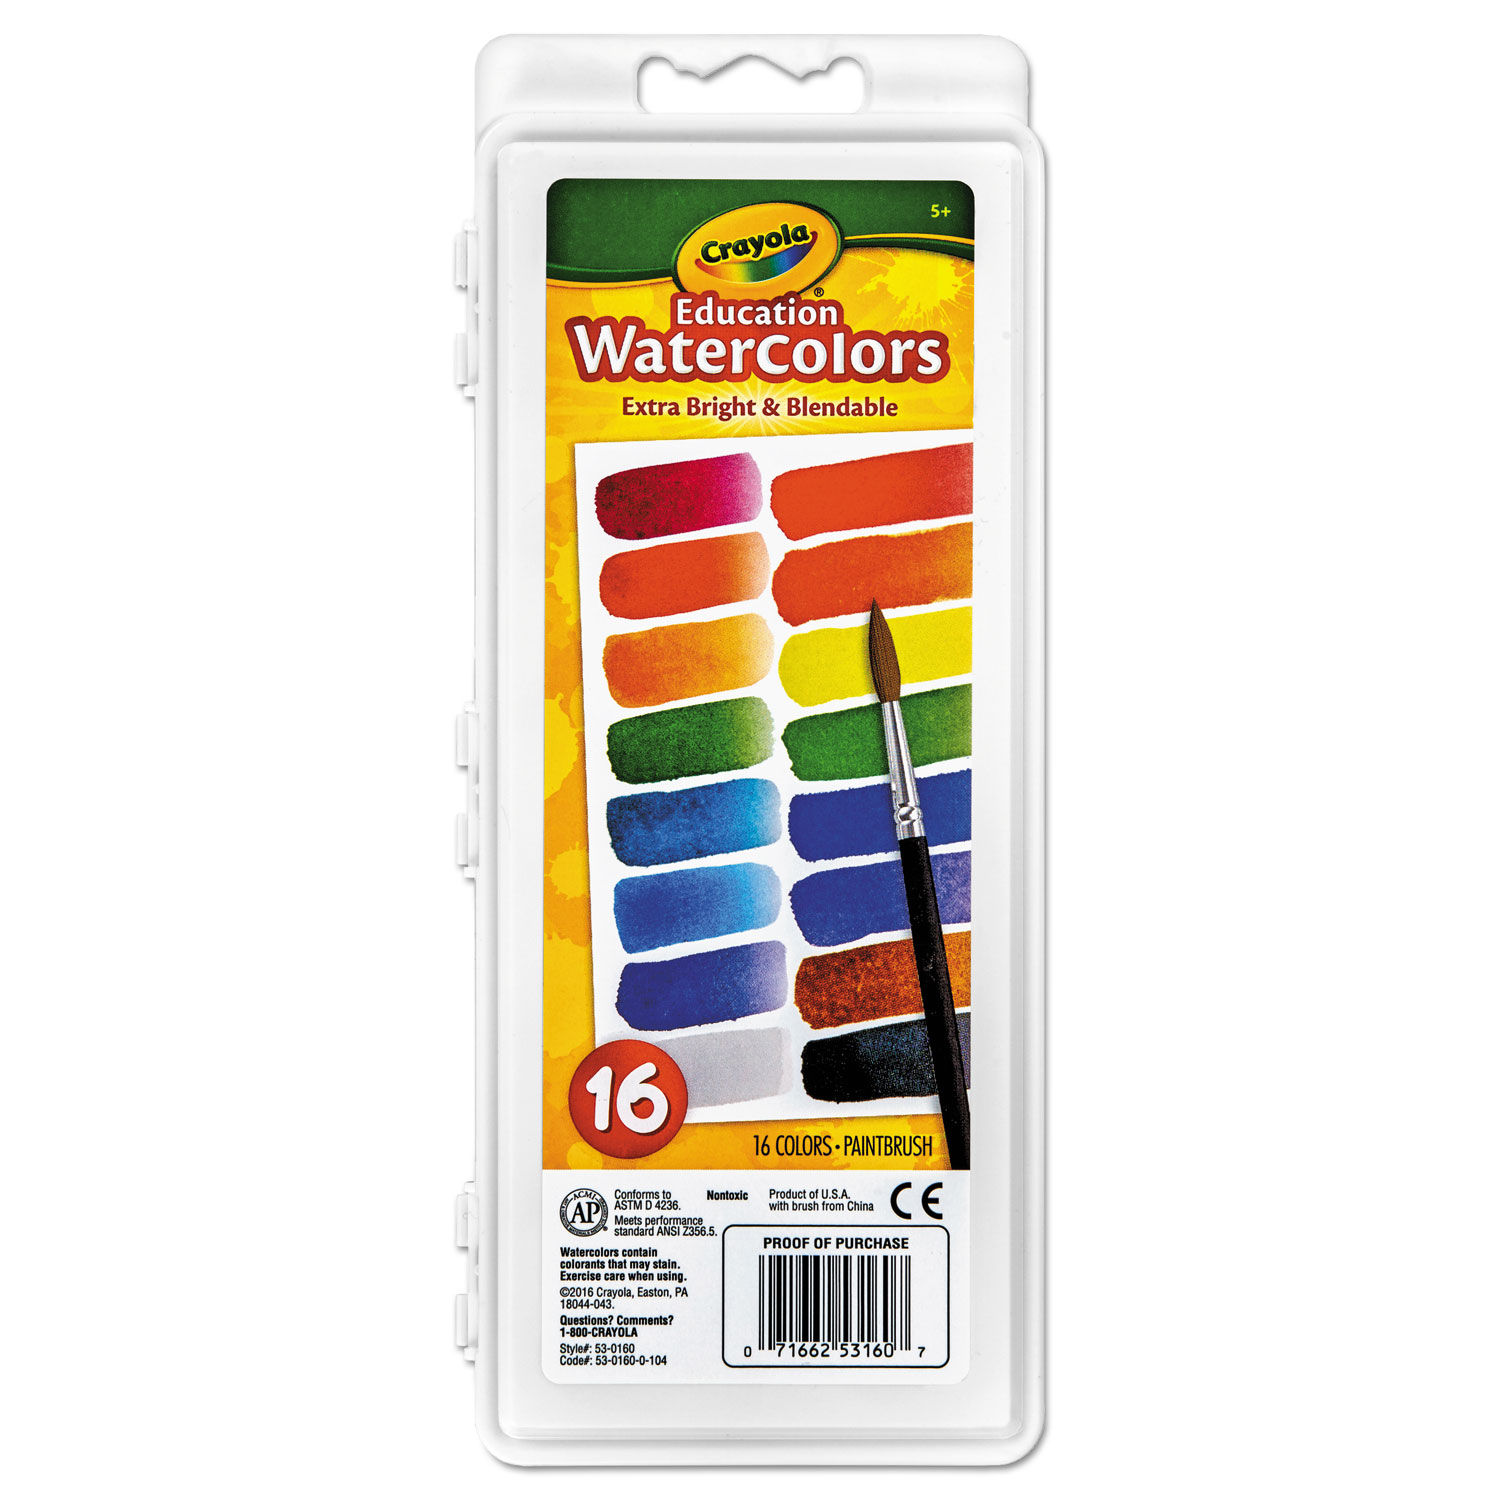 Watercolors 16 Assorted Colors, Palette Tray